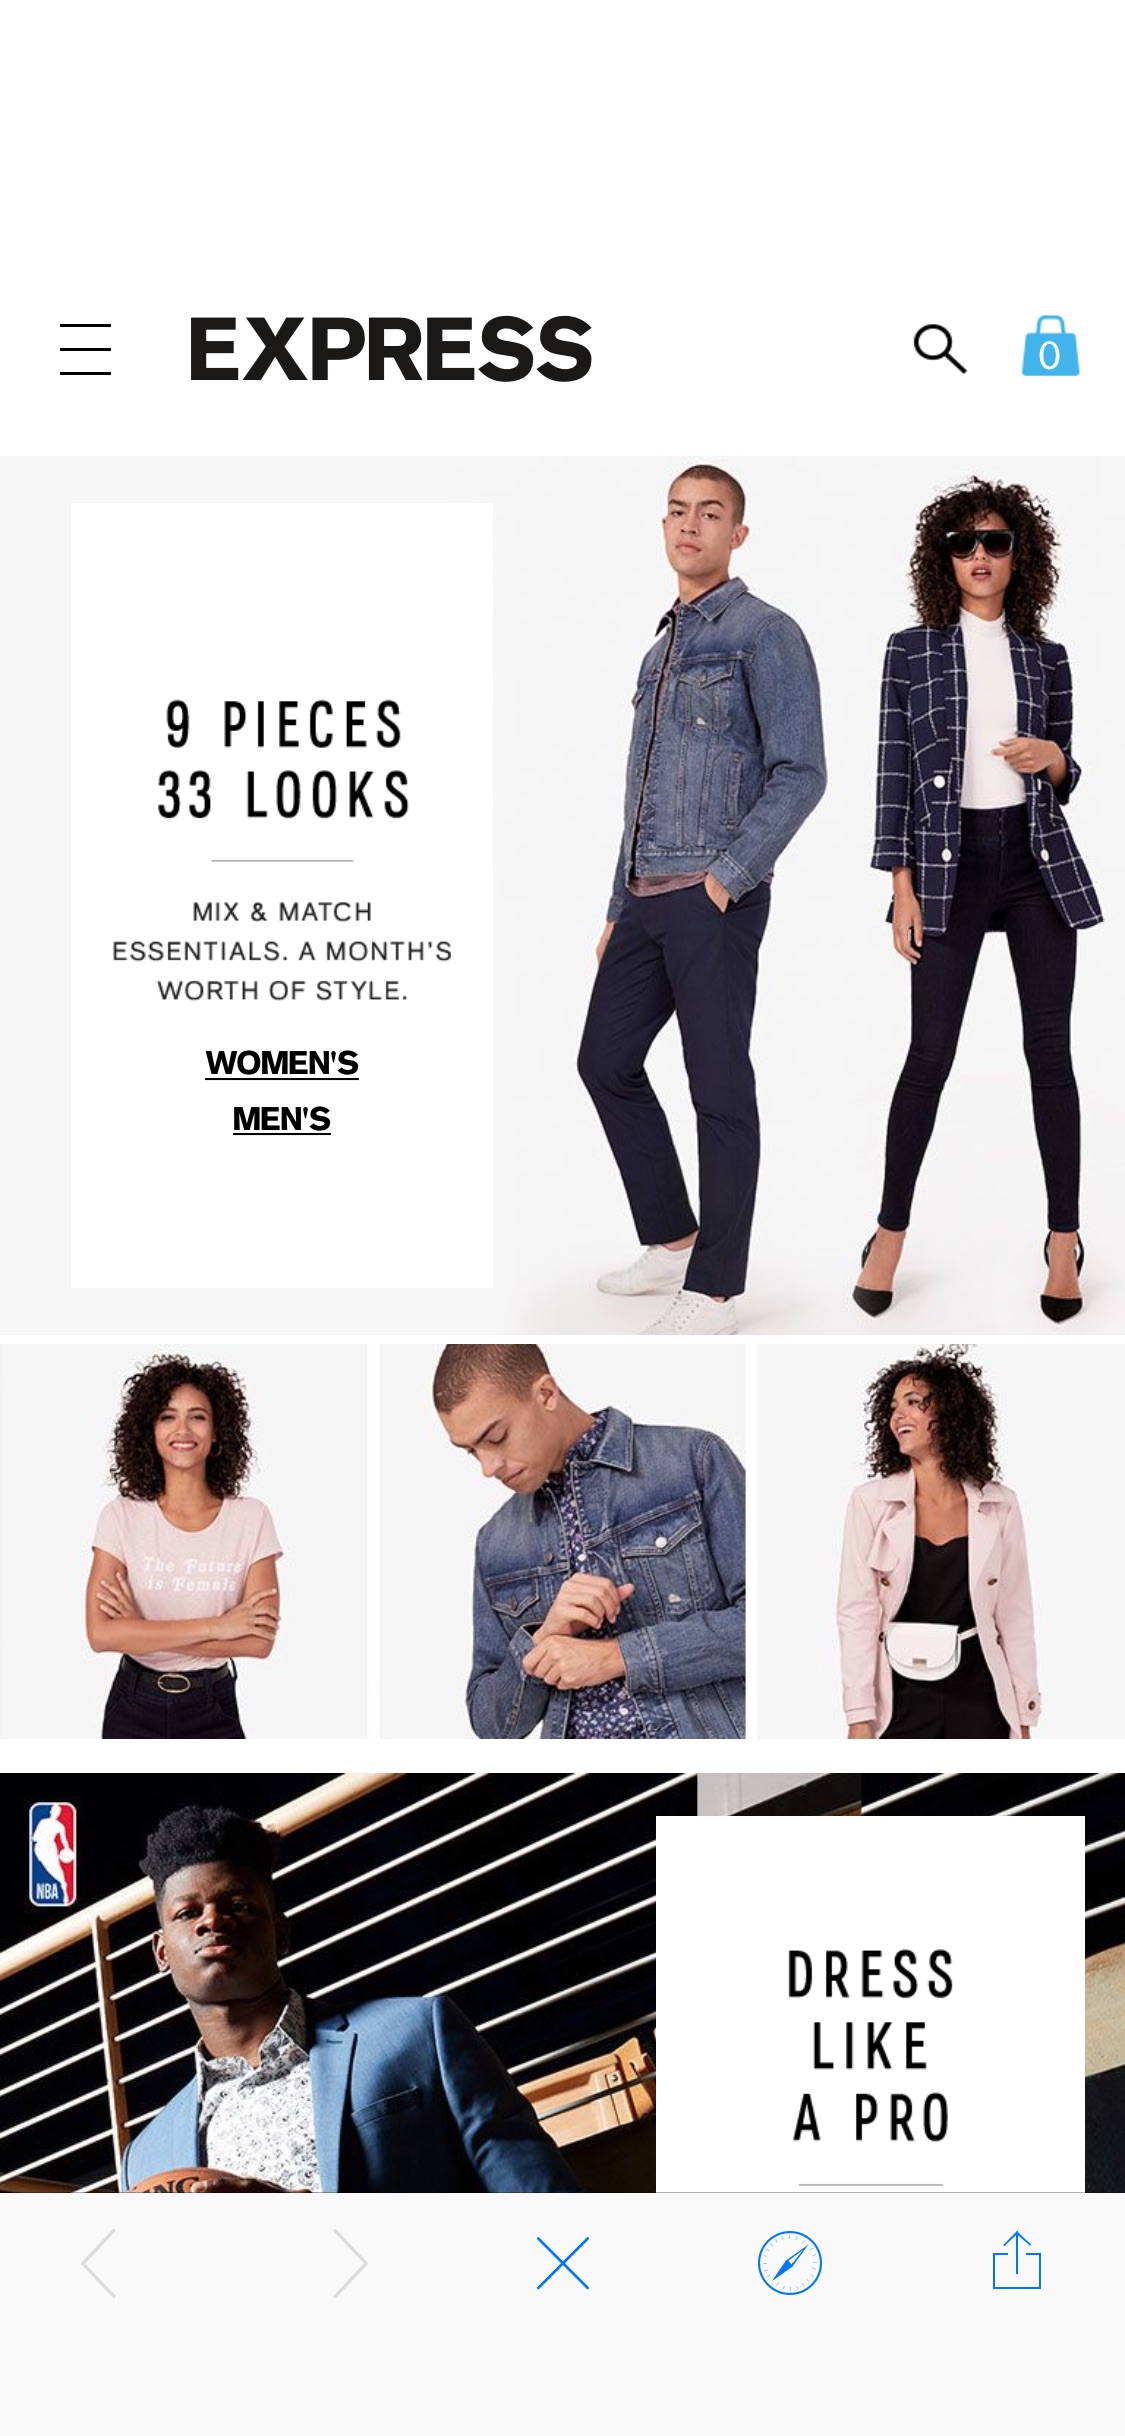 Men's and Women's Clothing - Shop jeans, dresses, and suits